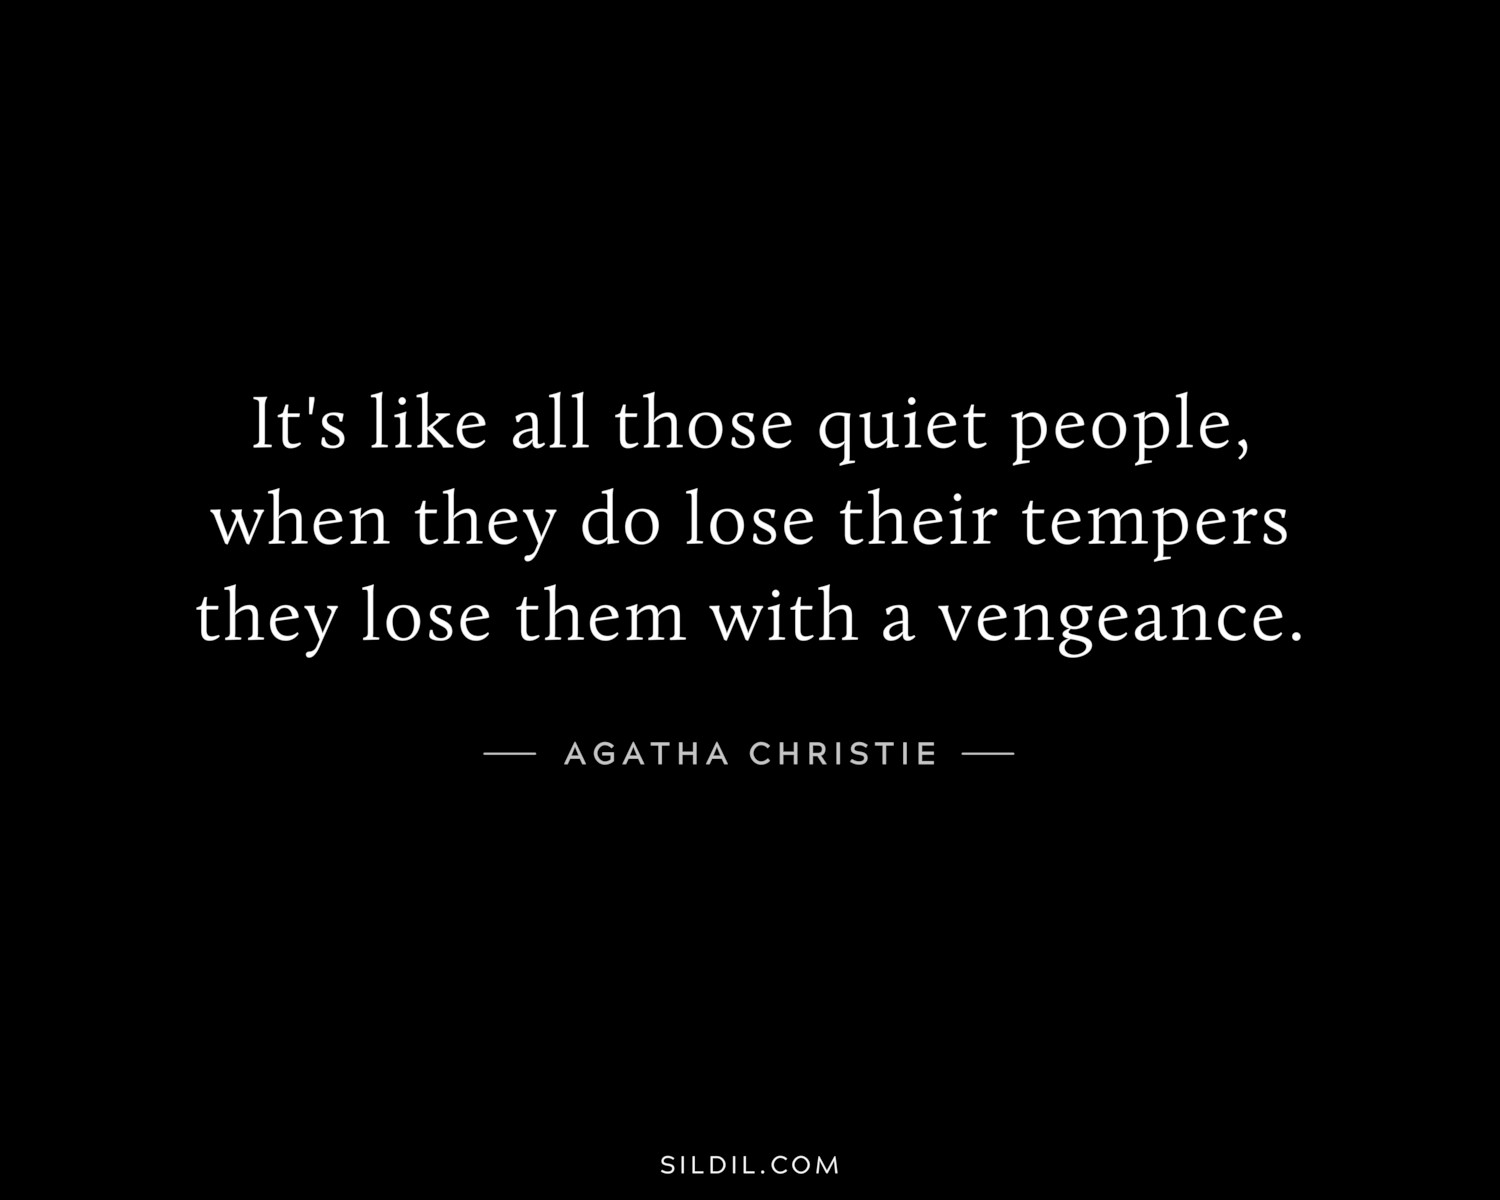 It's like all those quiet people, when they do lose their tempers they lose them with a vengeance.